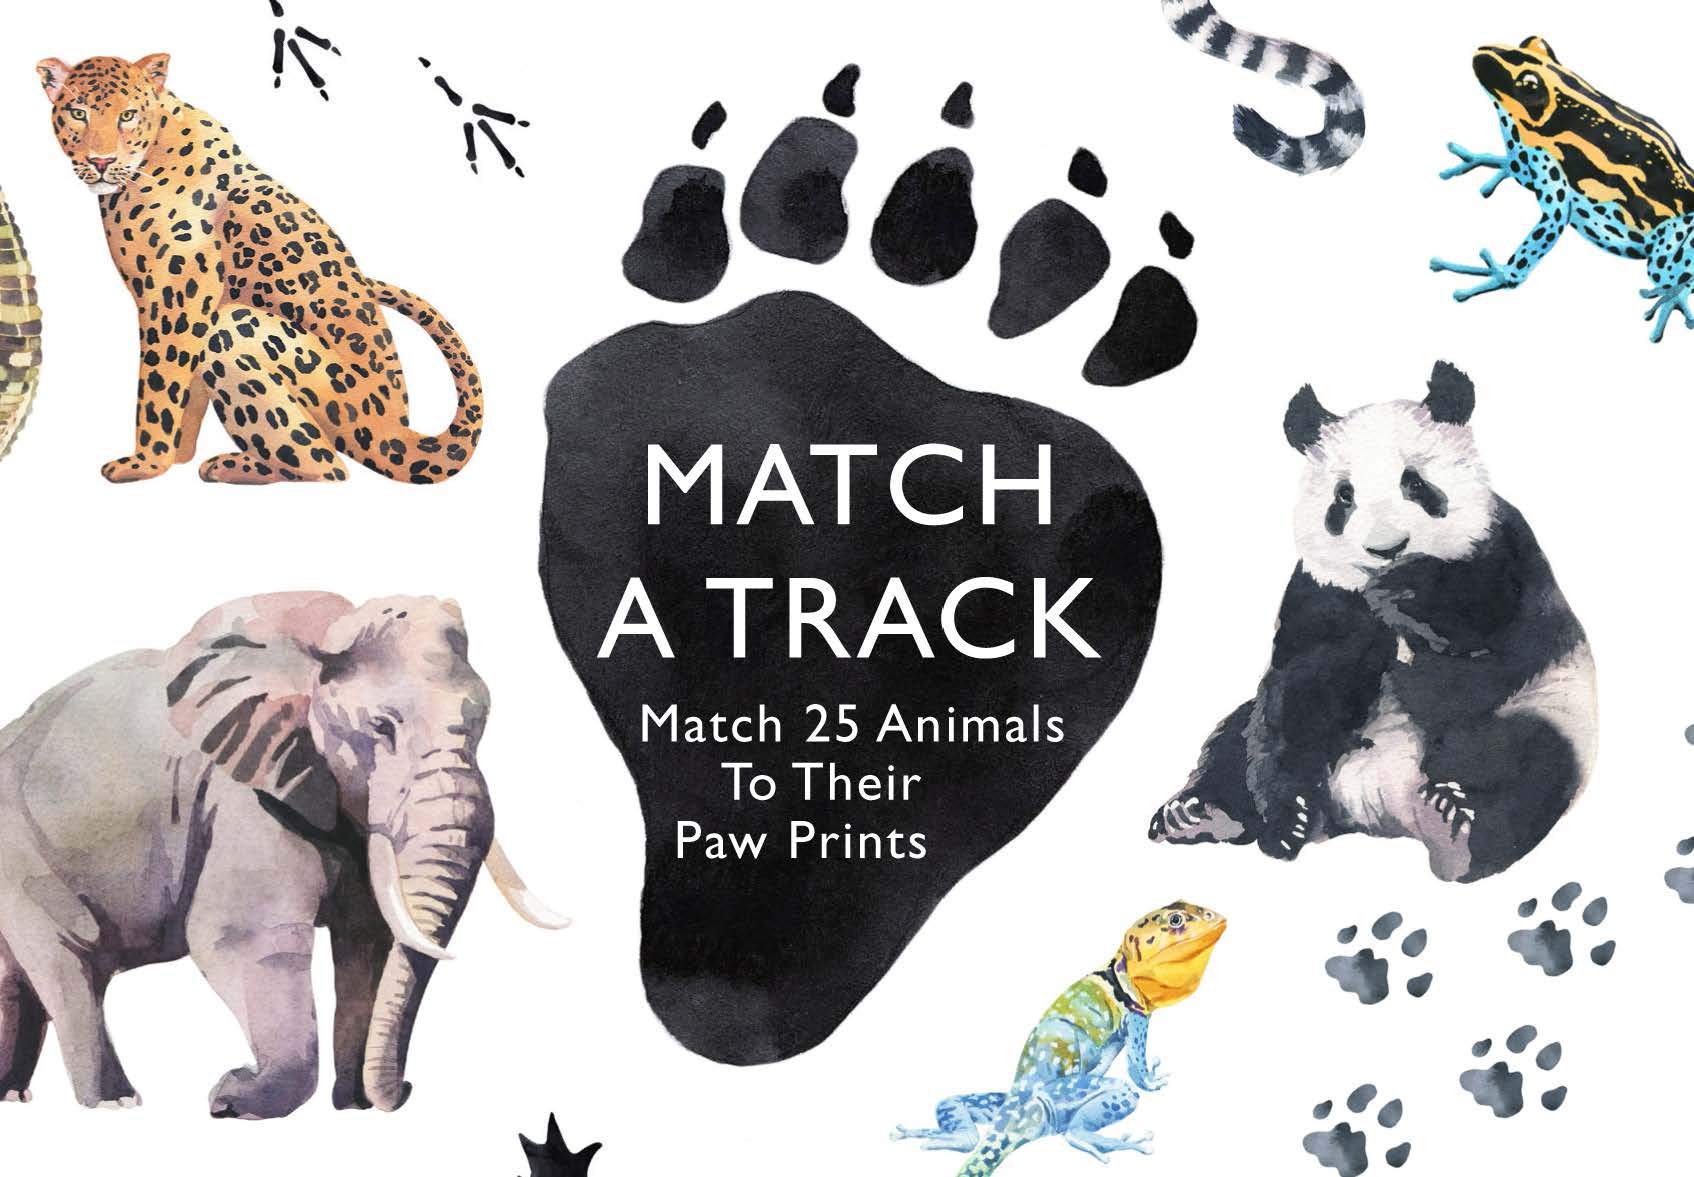 Match a Track Matching Game - Northwest Nature Shop